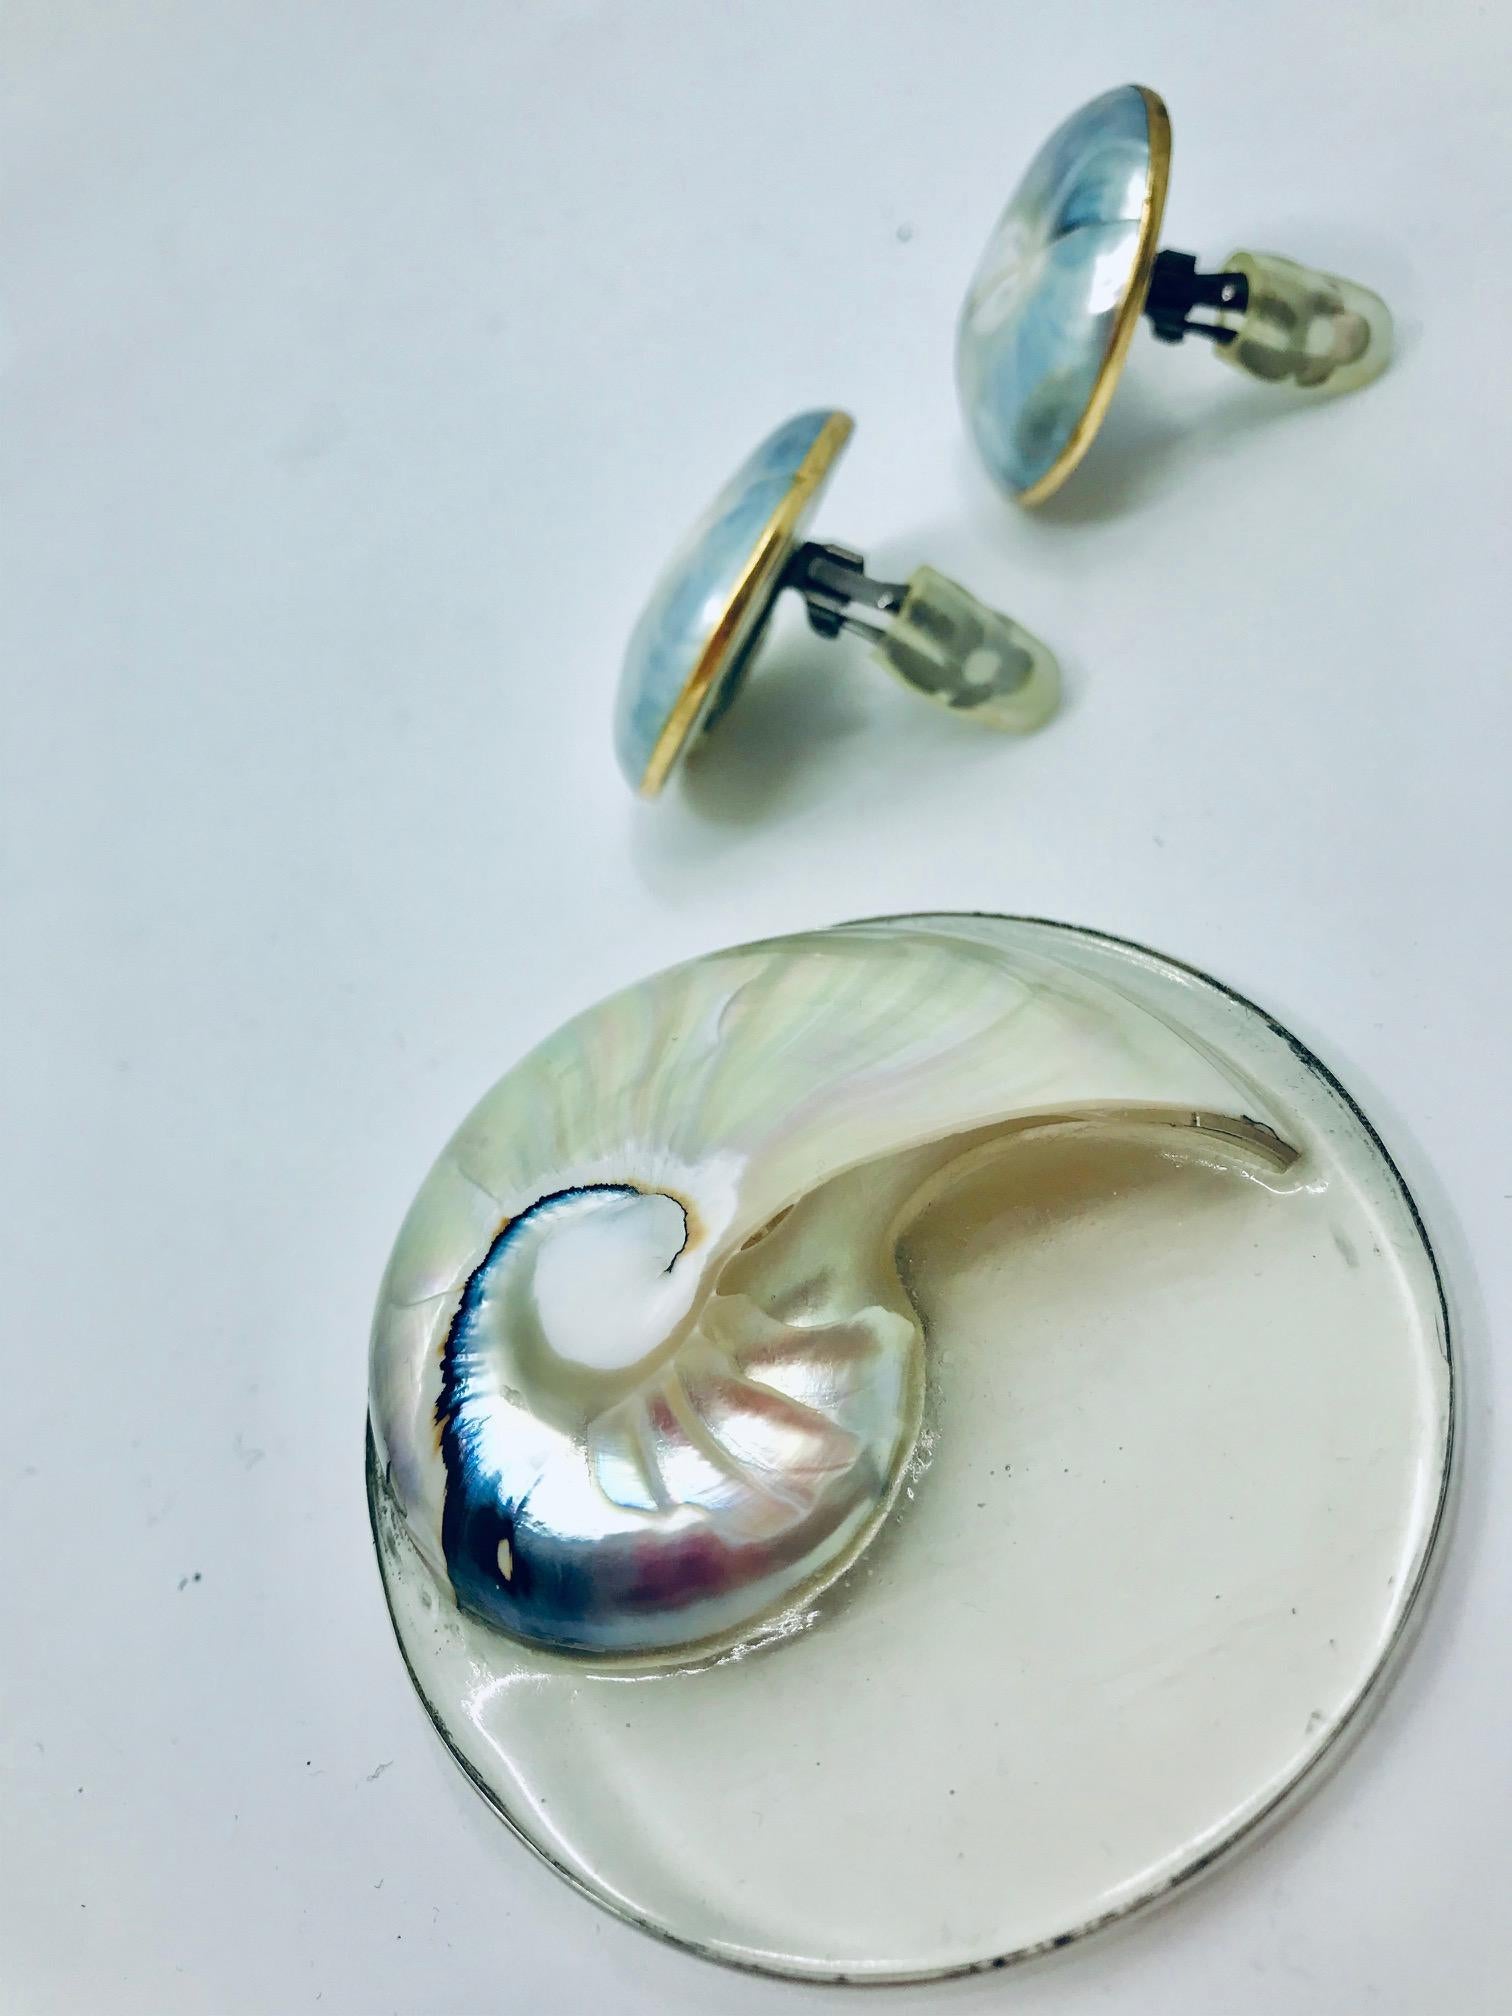  Nautilus Brooch on resin and Earrings. The brooch is made from natural Nautilus shell fuzed with clear Resin and framed in Silver, with magnetic clasp on the back. This set is unique one of a kind and handmade. S.Gottwald creations are fashionable